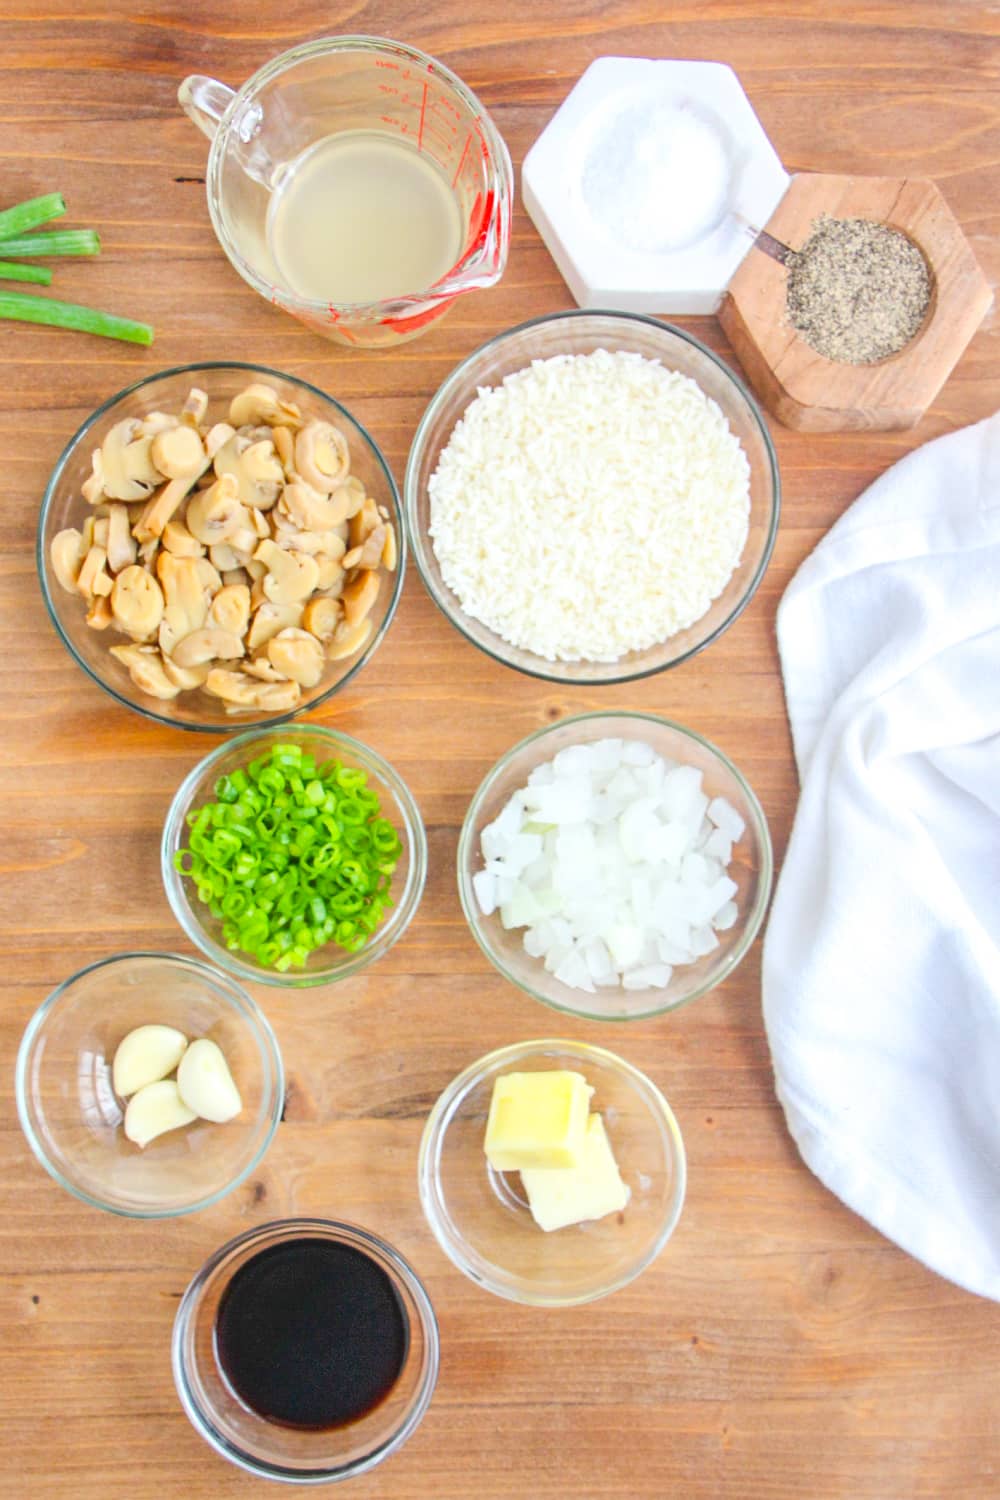 Measured ingredients needed for make Mushroom Fried Rice presented in clear bowls on a wood background.